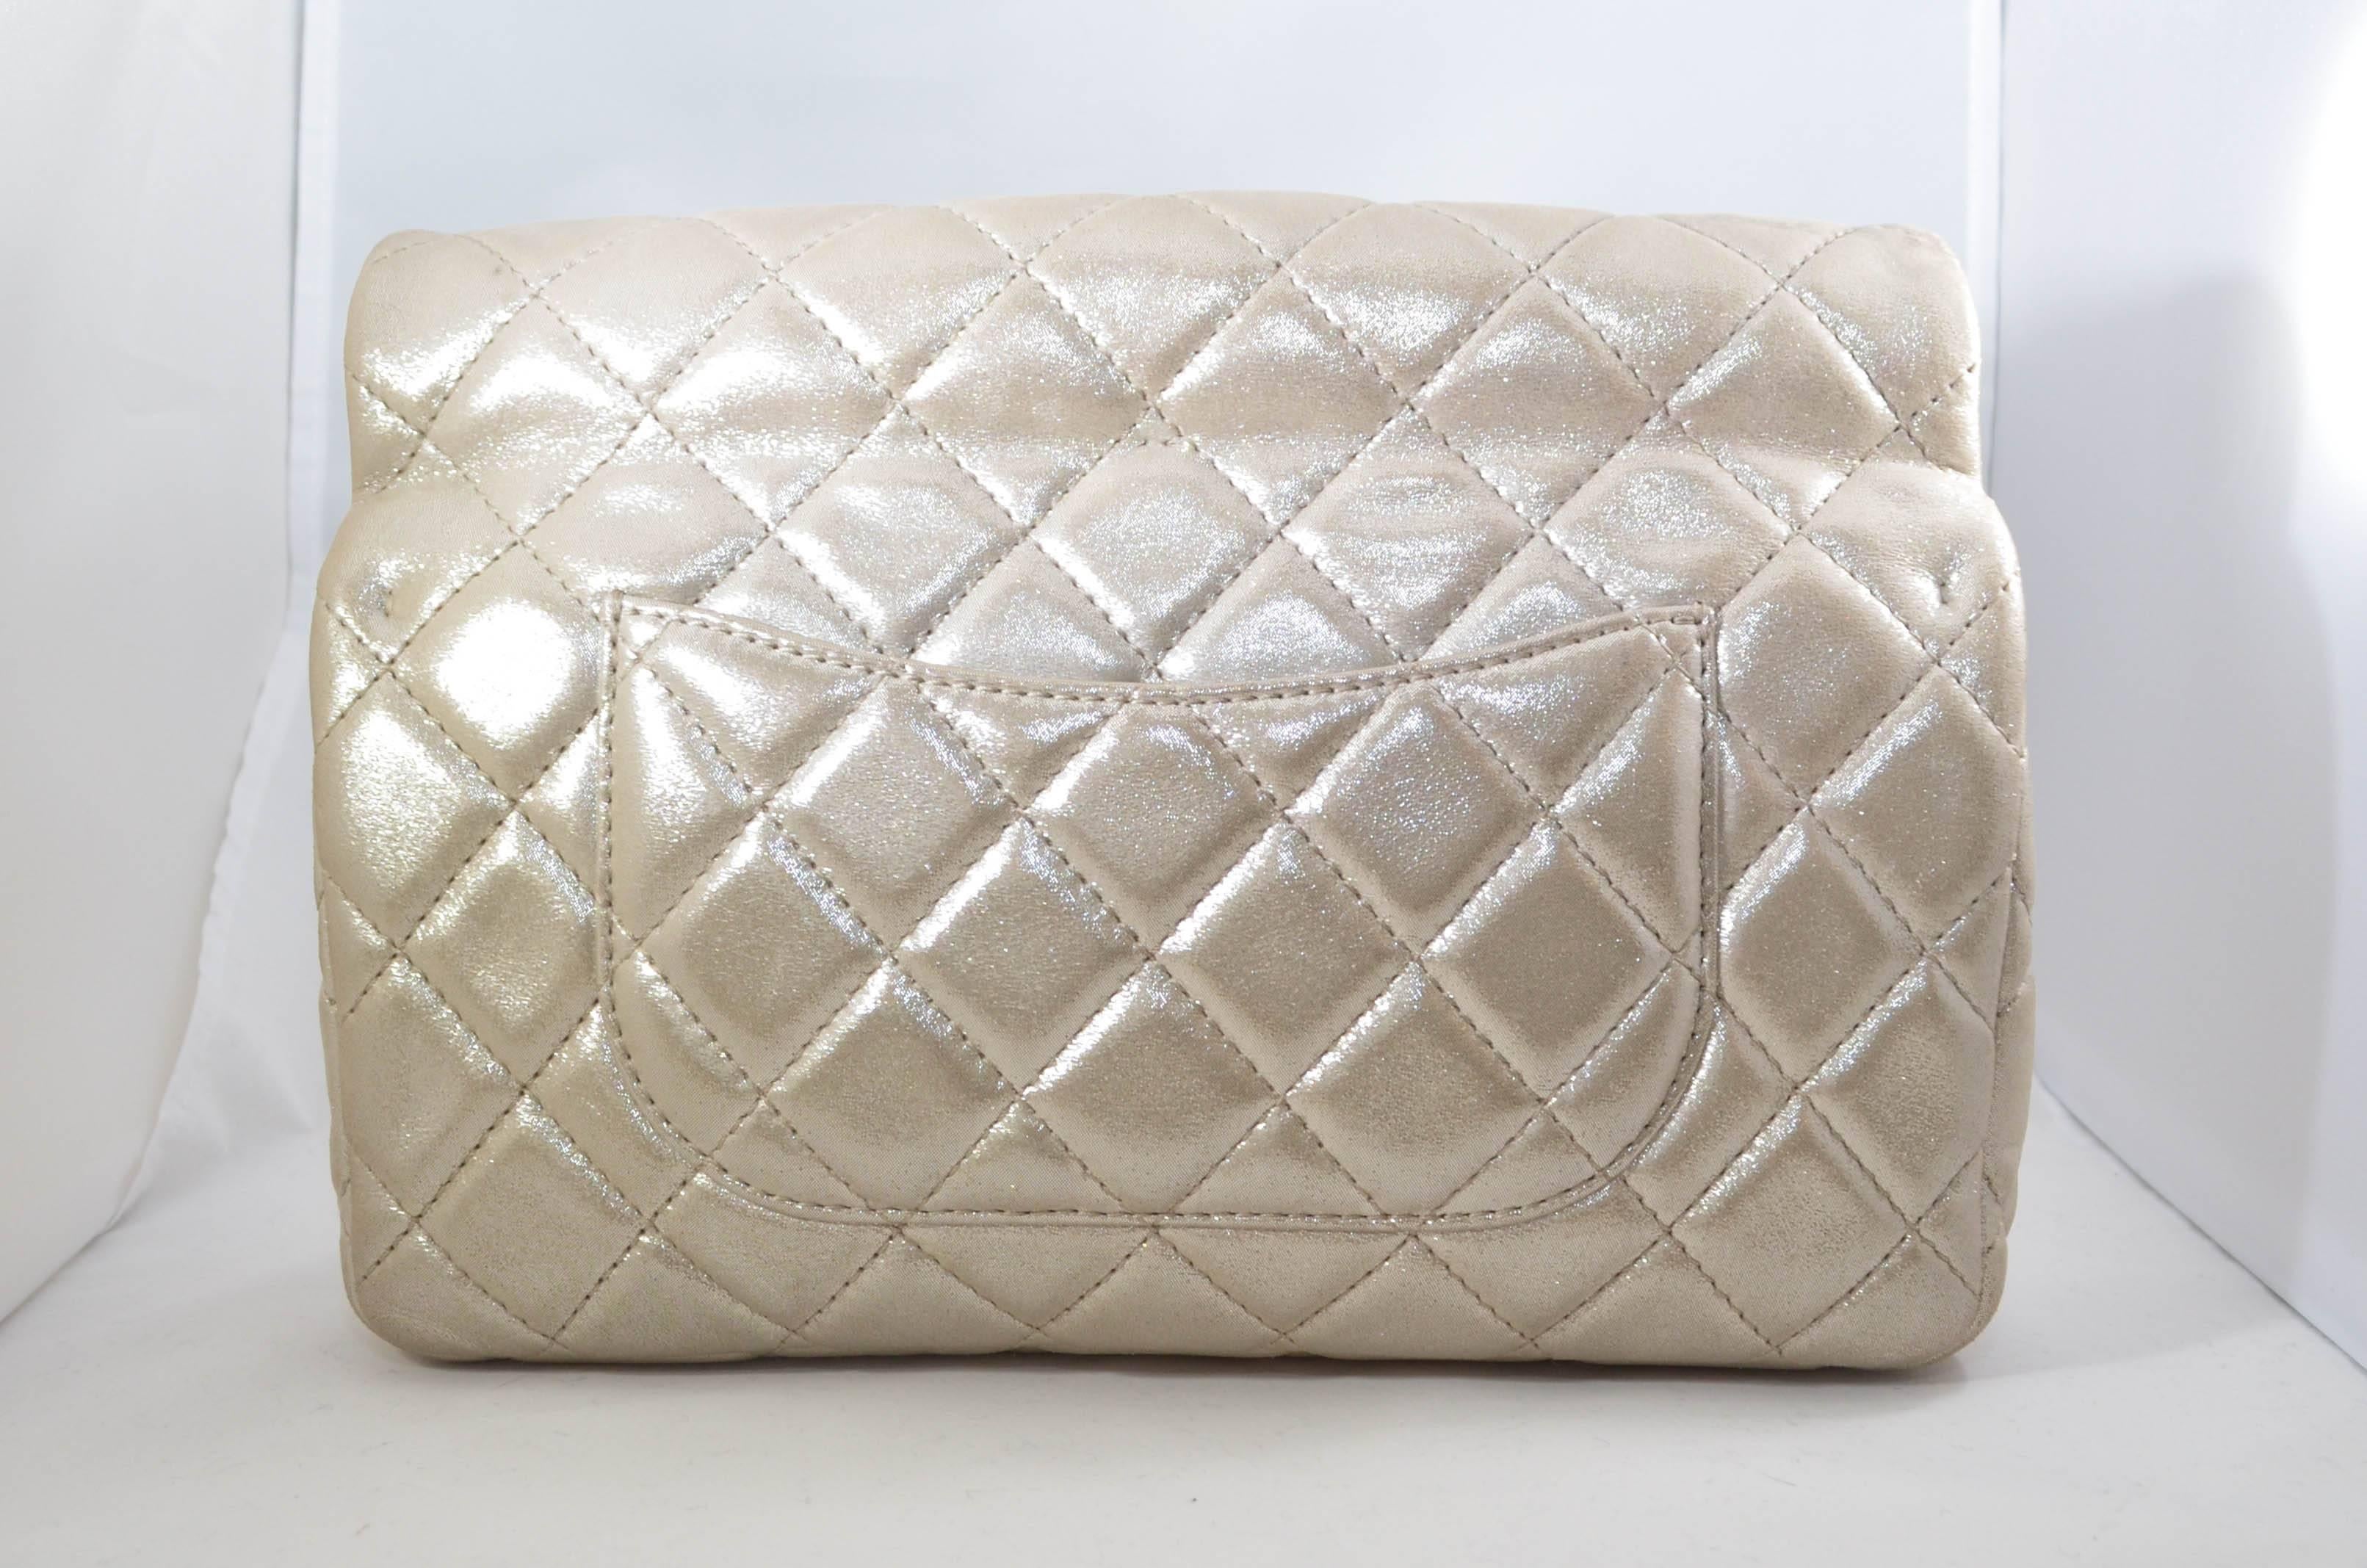 This fabulous Chanel Reissue Roll Top Clutch Quilted Lambskin is ideal for nights out. Crafted in quilted lambskin leather, this clutch features rolled top handle, frontal flap, exterior back pocket and hardware accents. Its mademoiselle turn-lock